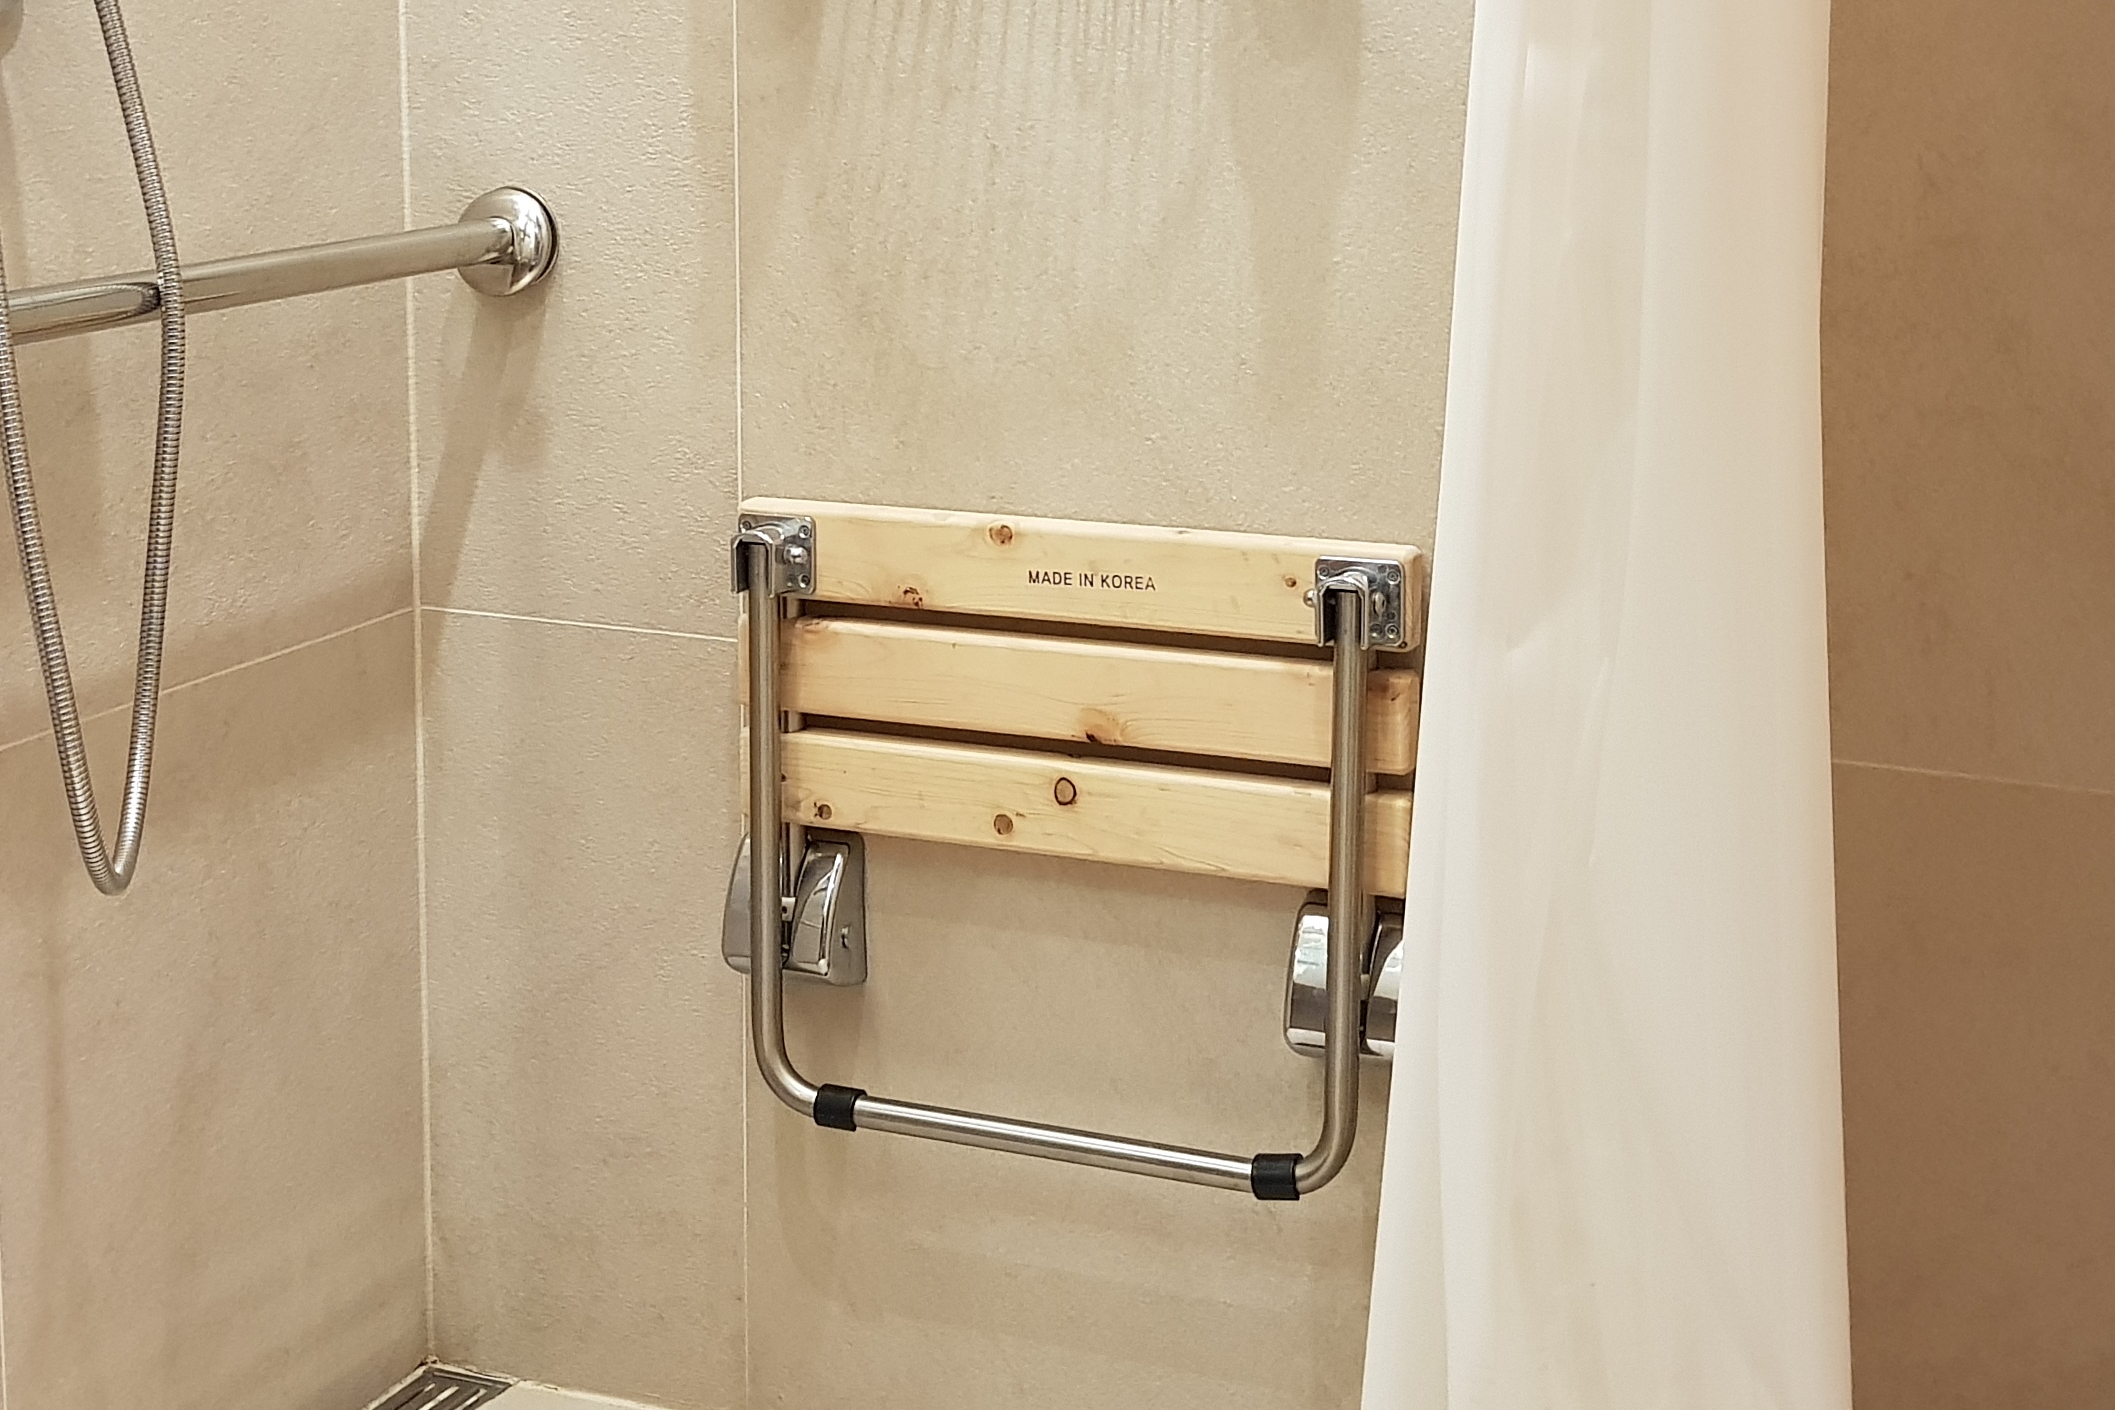 Roll-in shower0 : Shower chairs installed in the restroom of the Aloft Seoul Myeongdong
